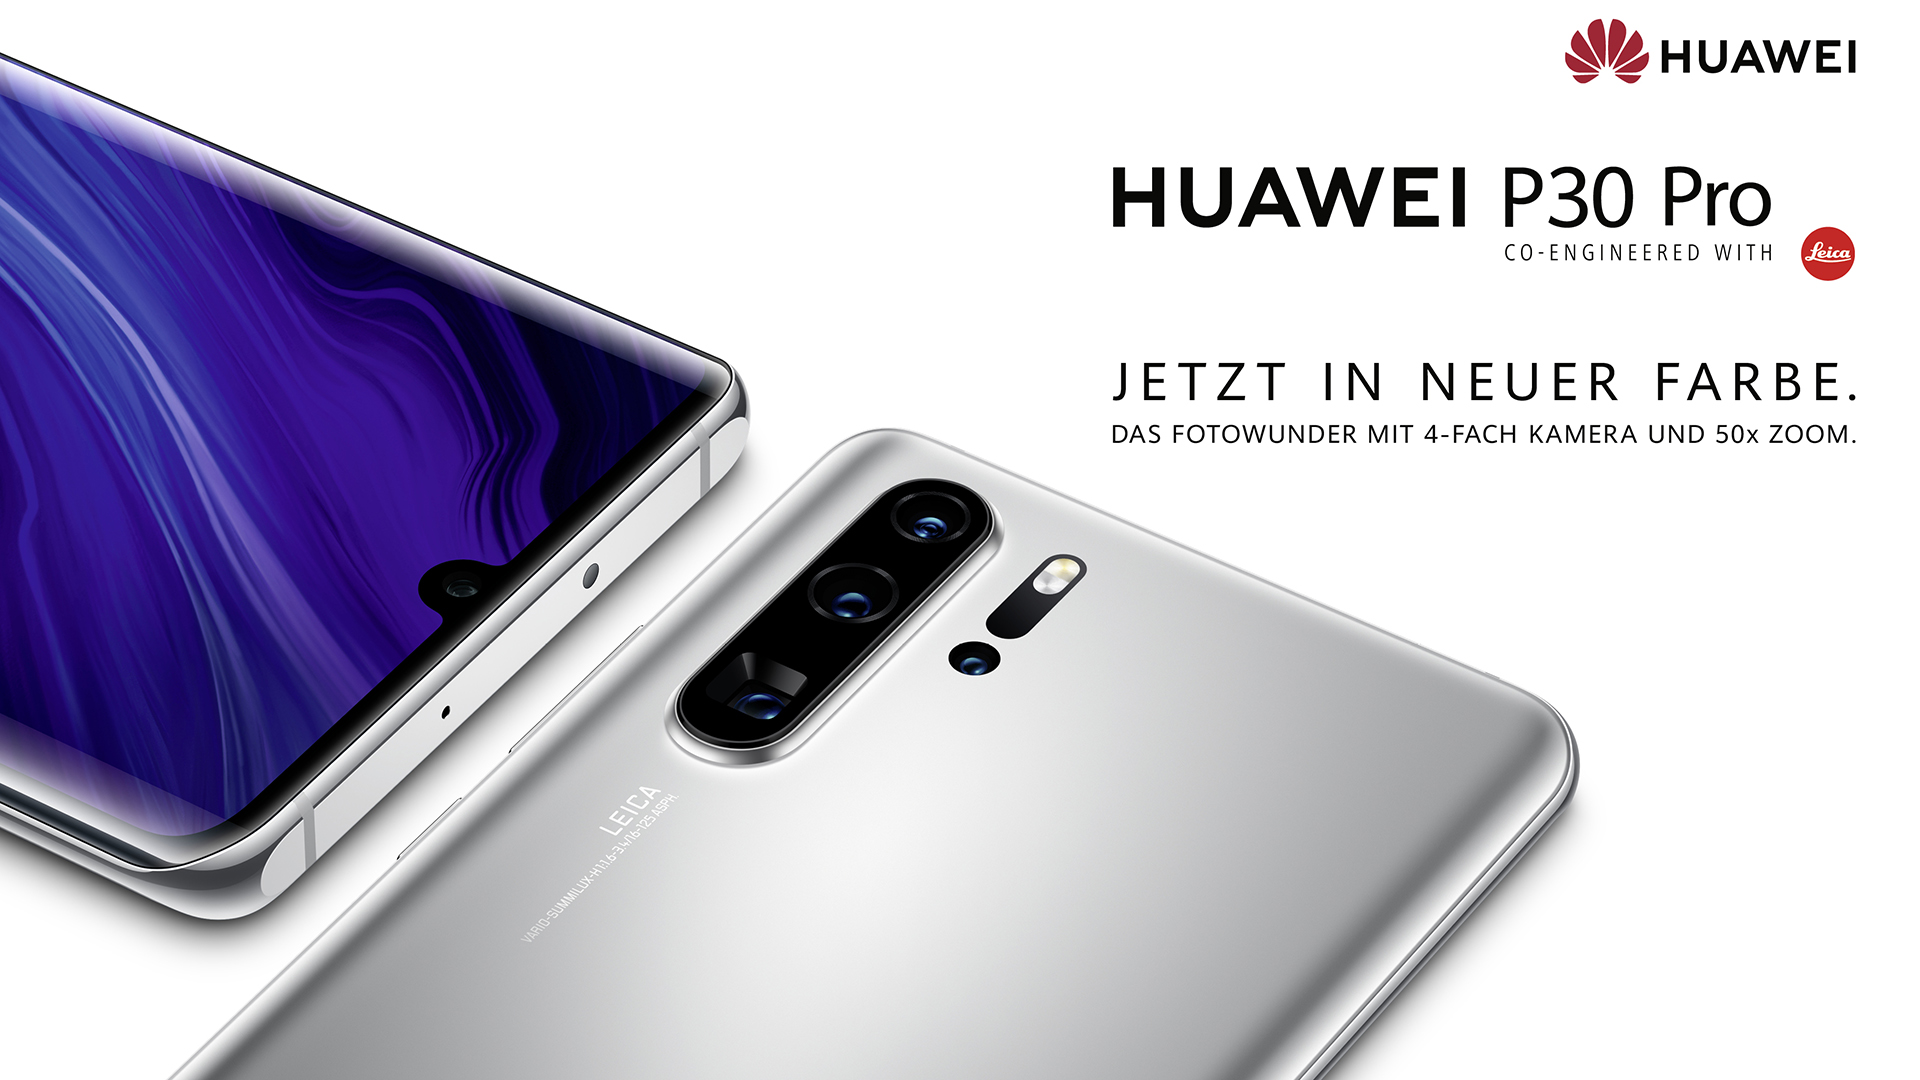 HUAWEI P30 Pro NEW EDITION